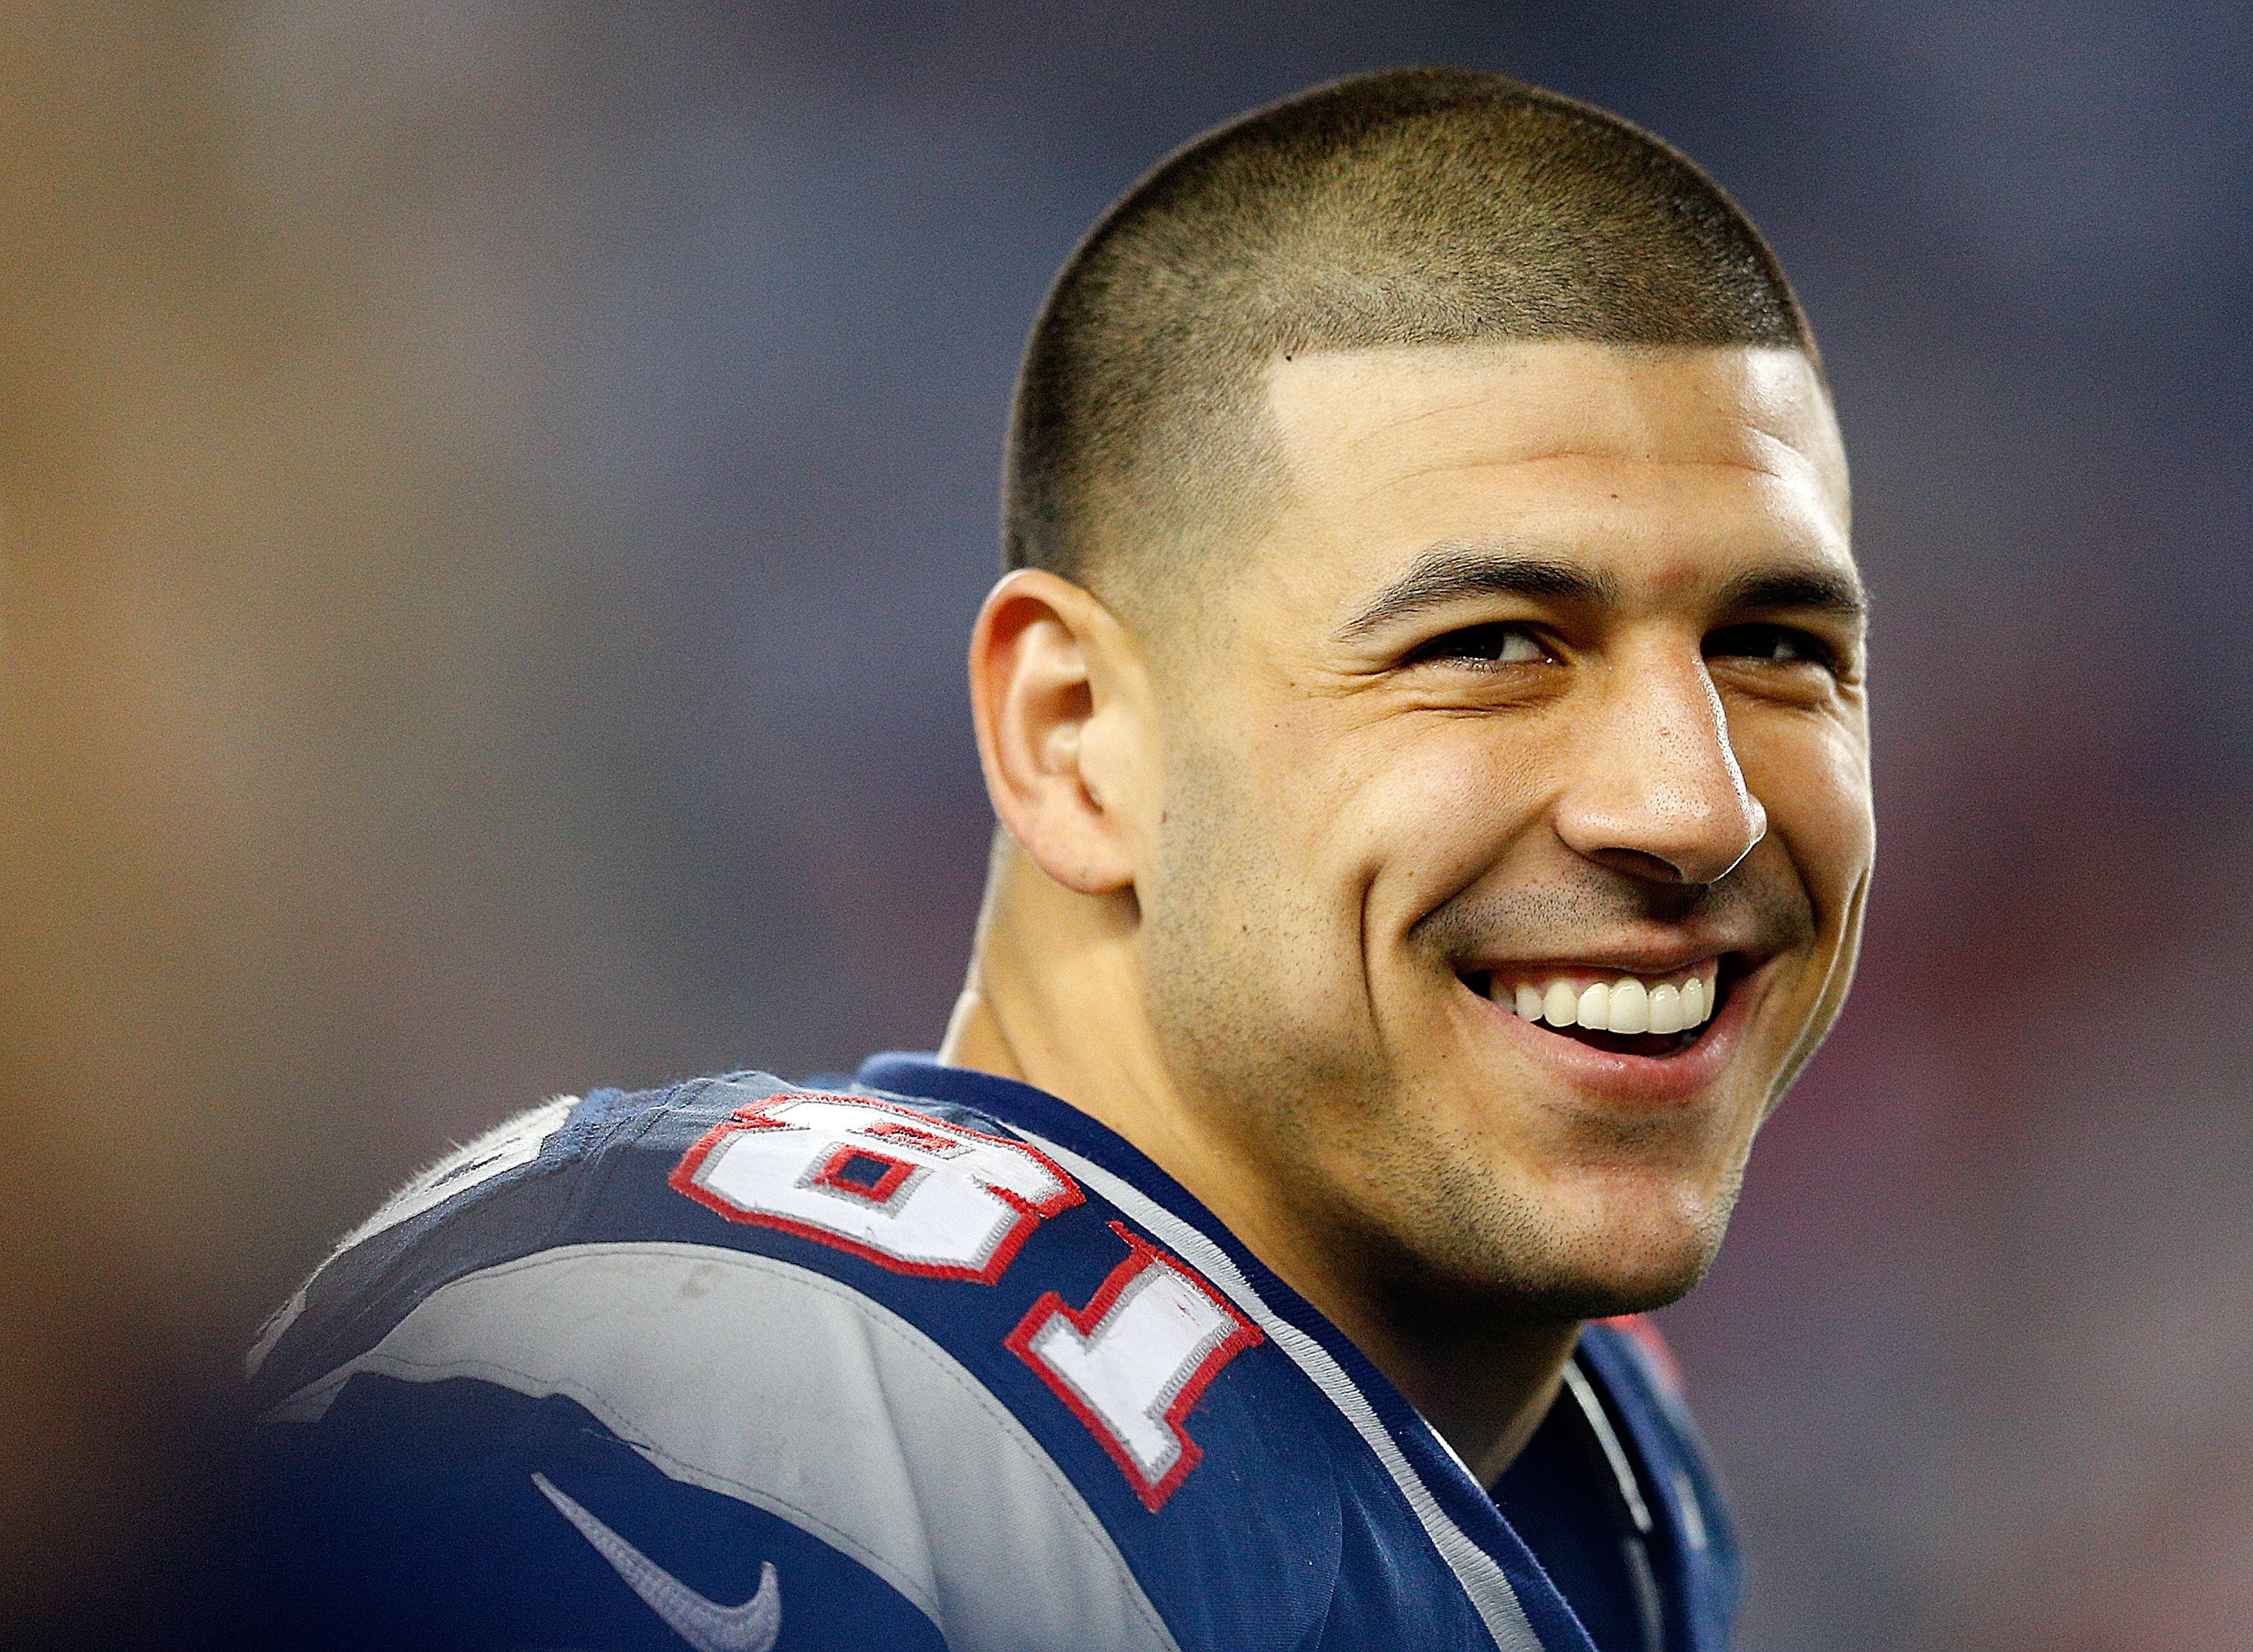 Aaron Hernandez during a game against the Houston Texans at Gillette Stadium on December 10, 2012, in Foxboro, Massachusetts. | Source: Getty Images